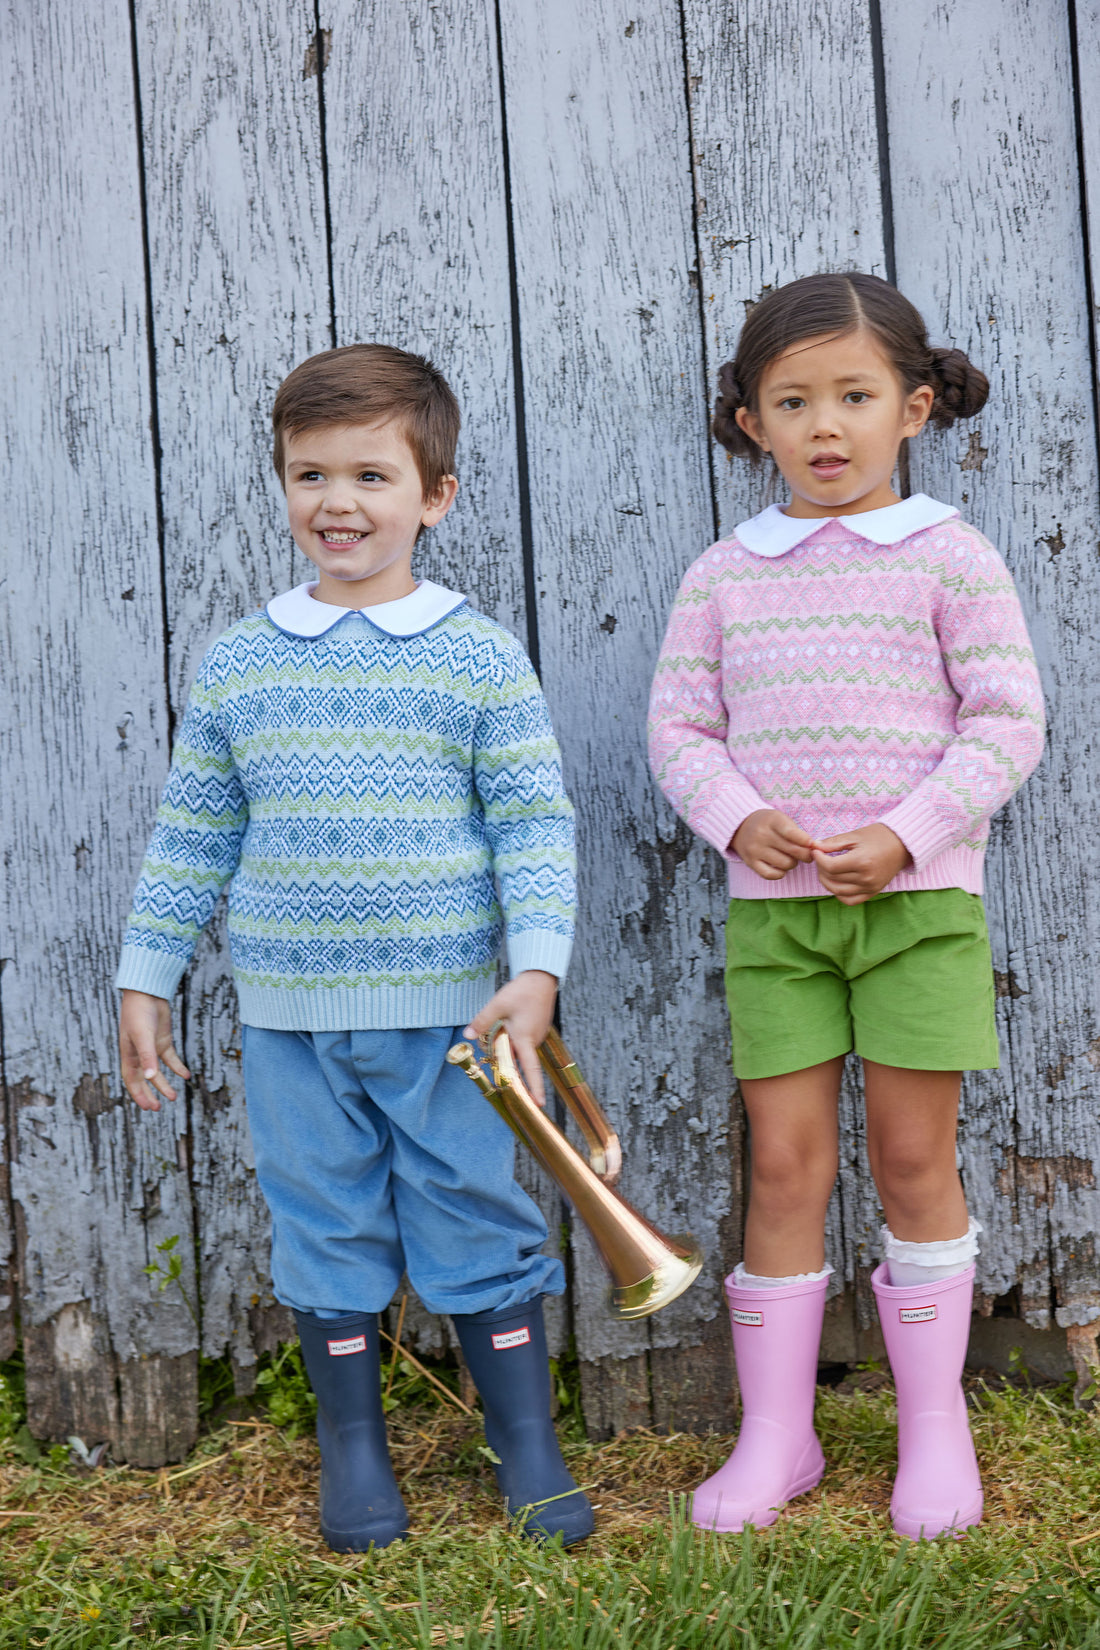 Little English classic childrens clothing toddler boy blue and green fair isle sweater 